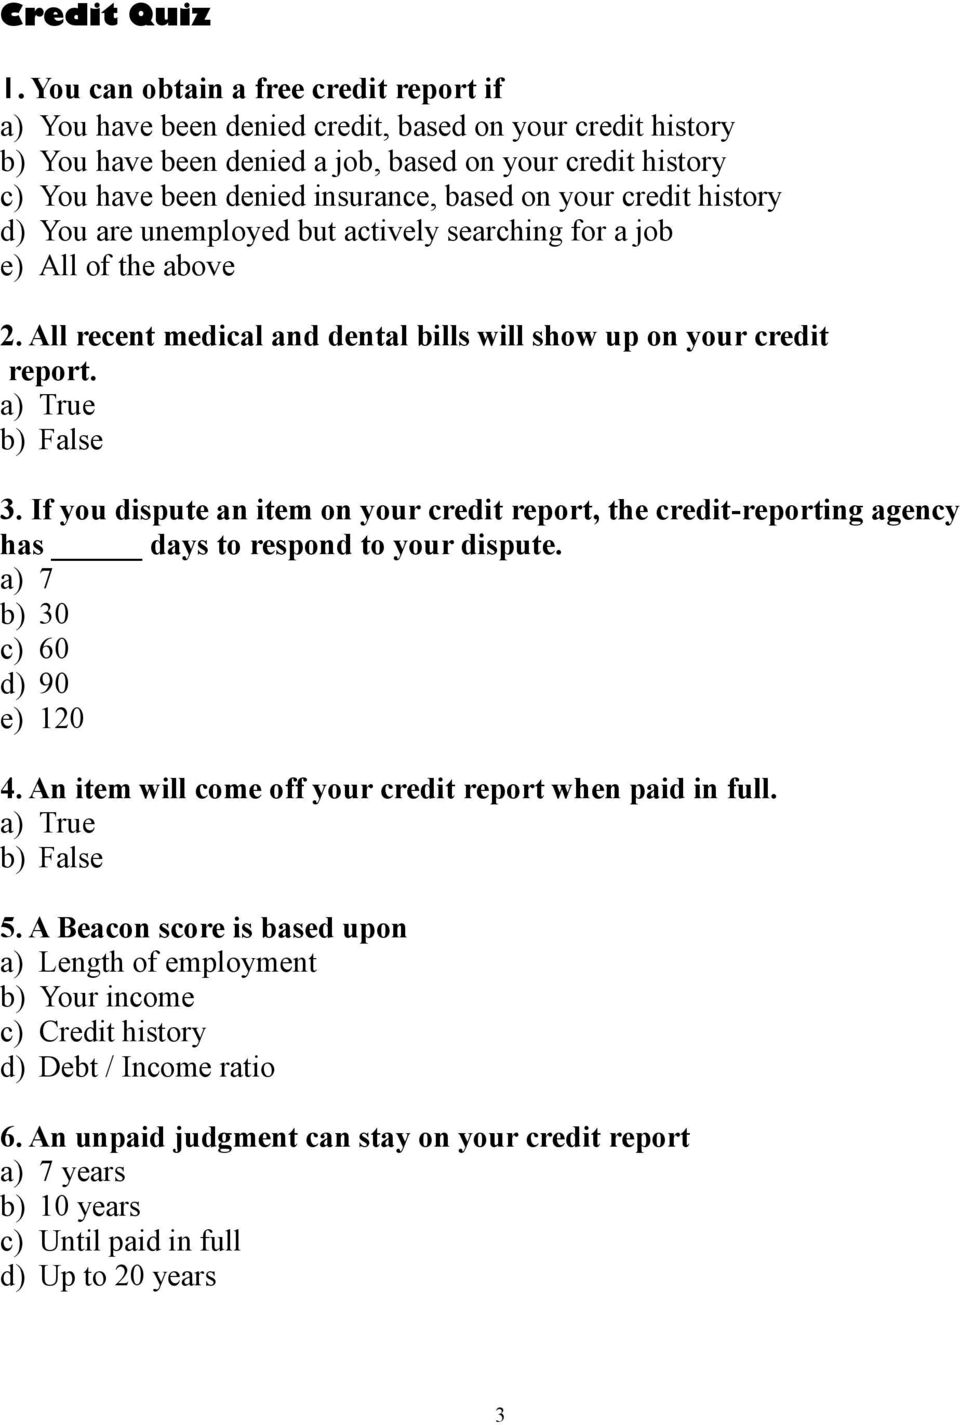 based on your credit history d) You are unemployed but actively searching for a job e) All of the above 2. All recent medical and dental bills will show up on your credit report. a) True b) False 3.